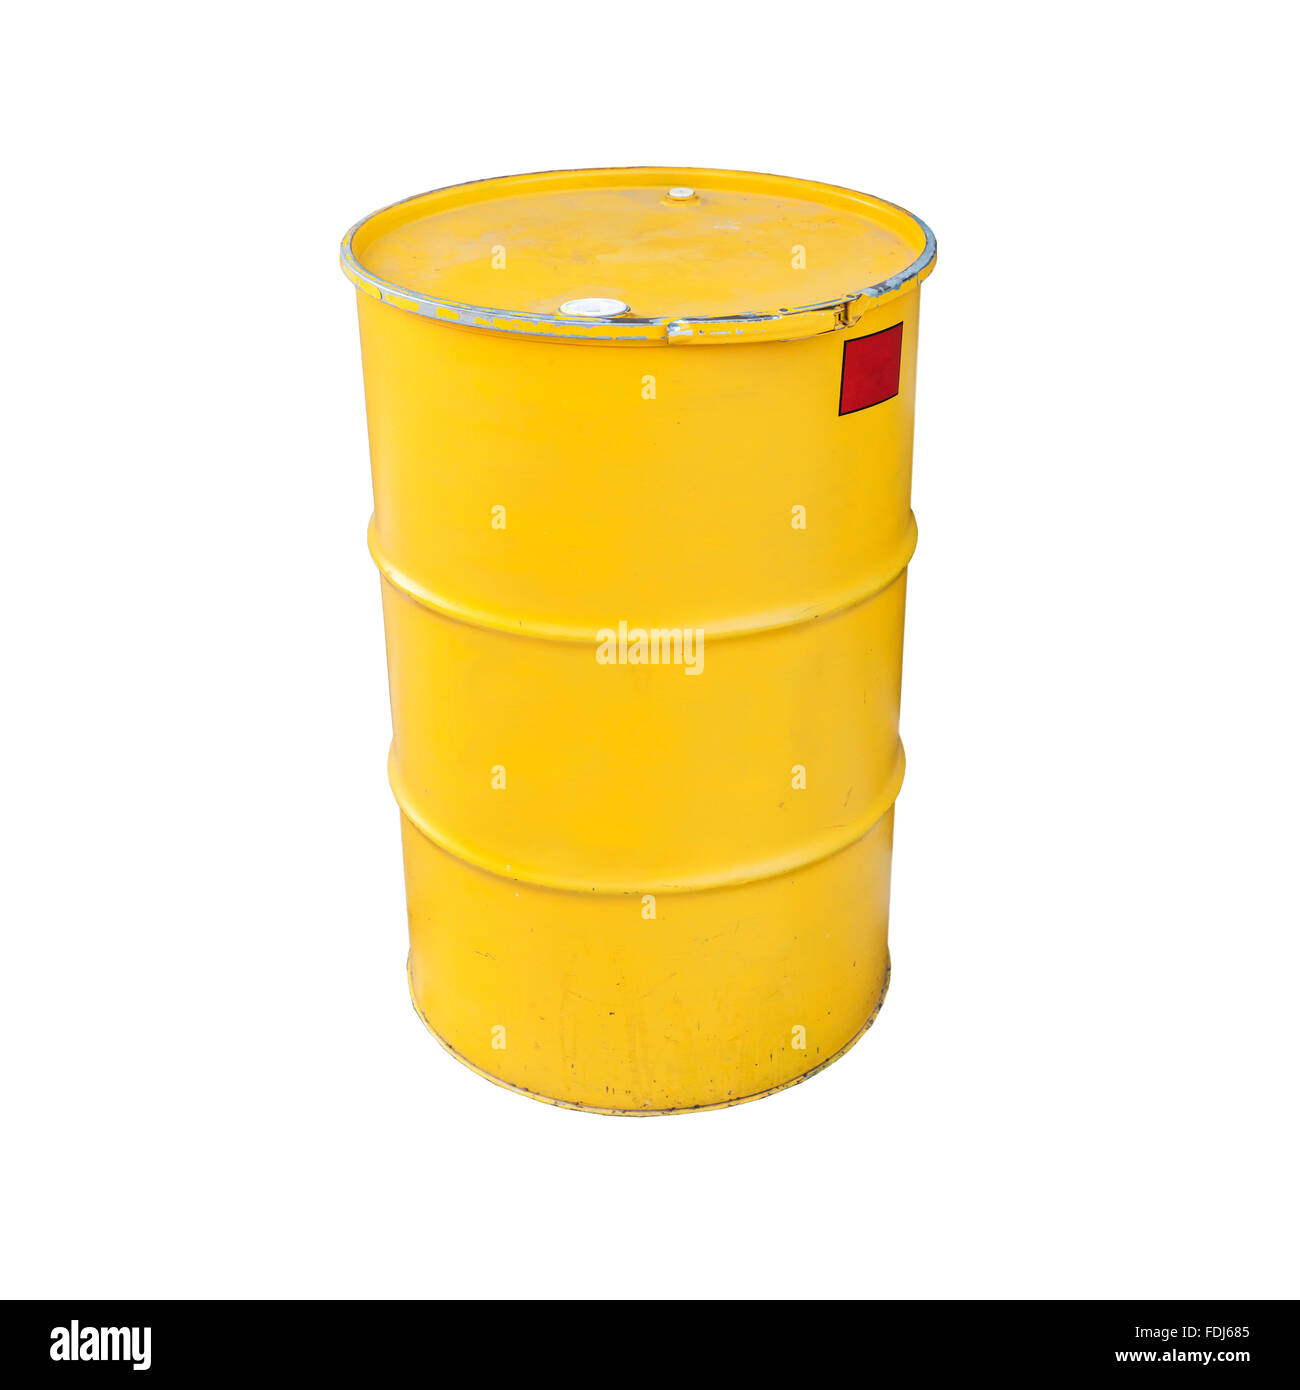 Yellow metal barrel isolated on white background Stock Photo